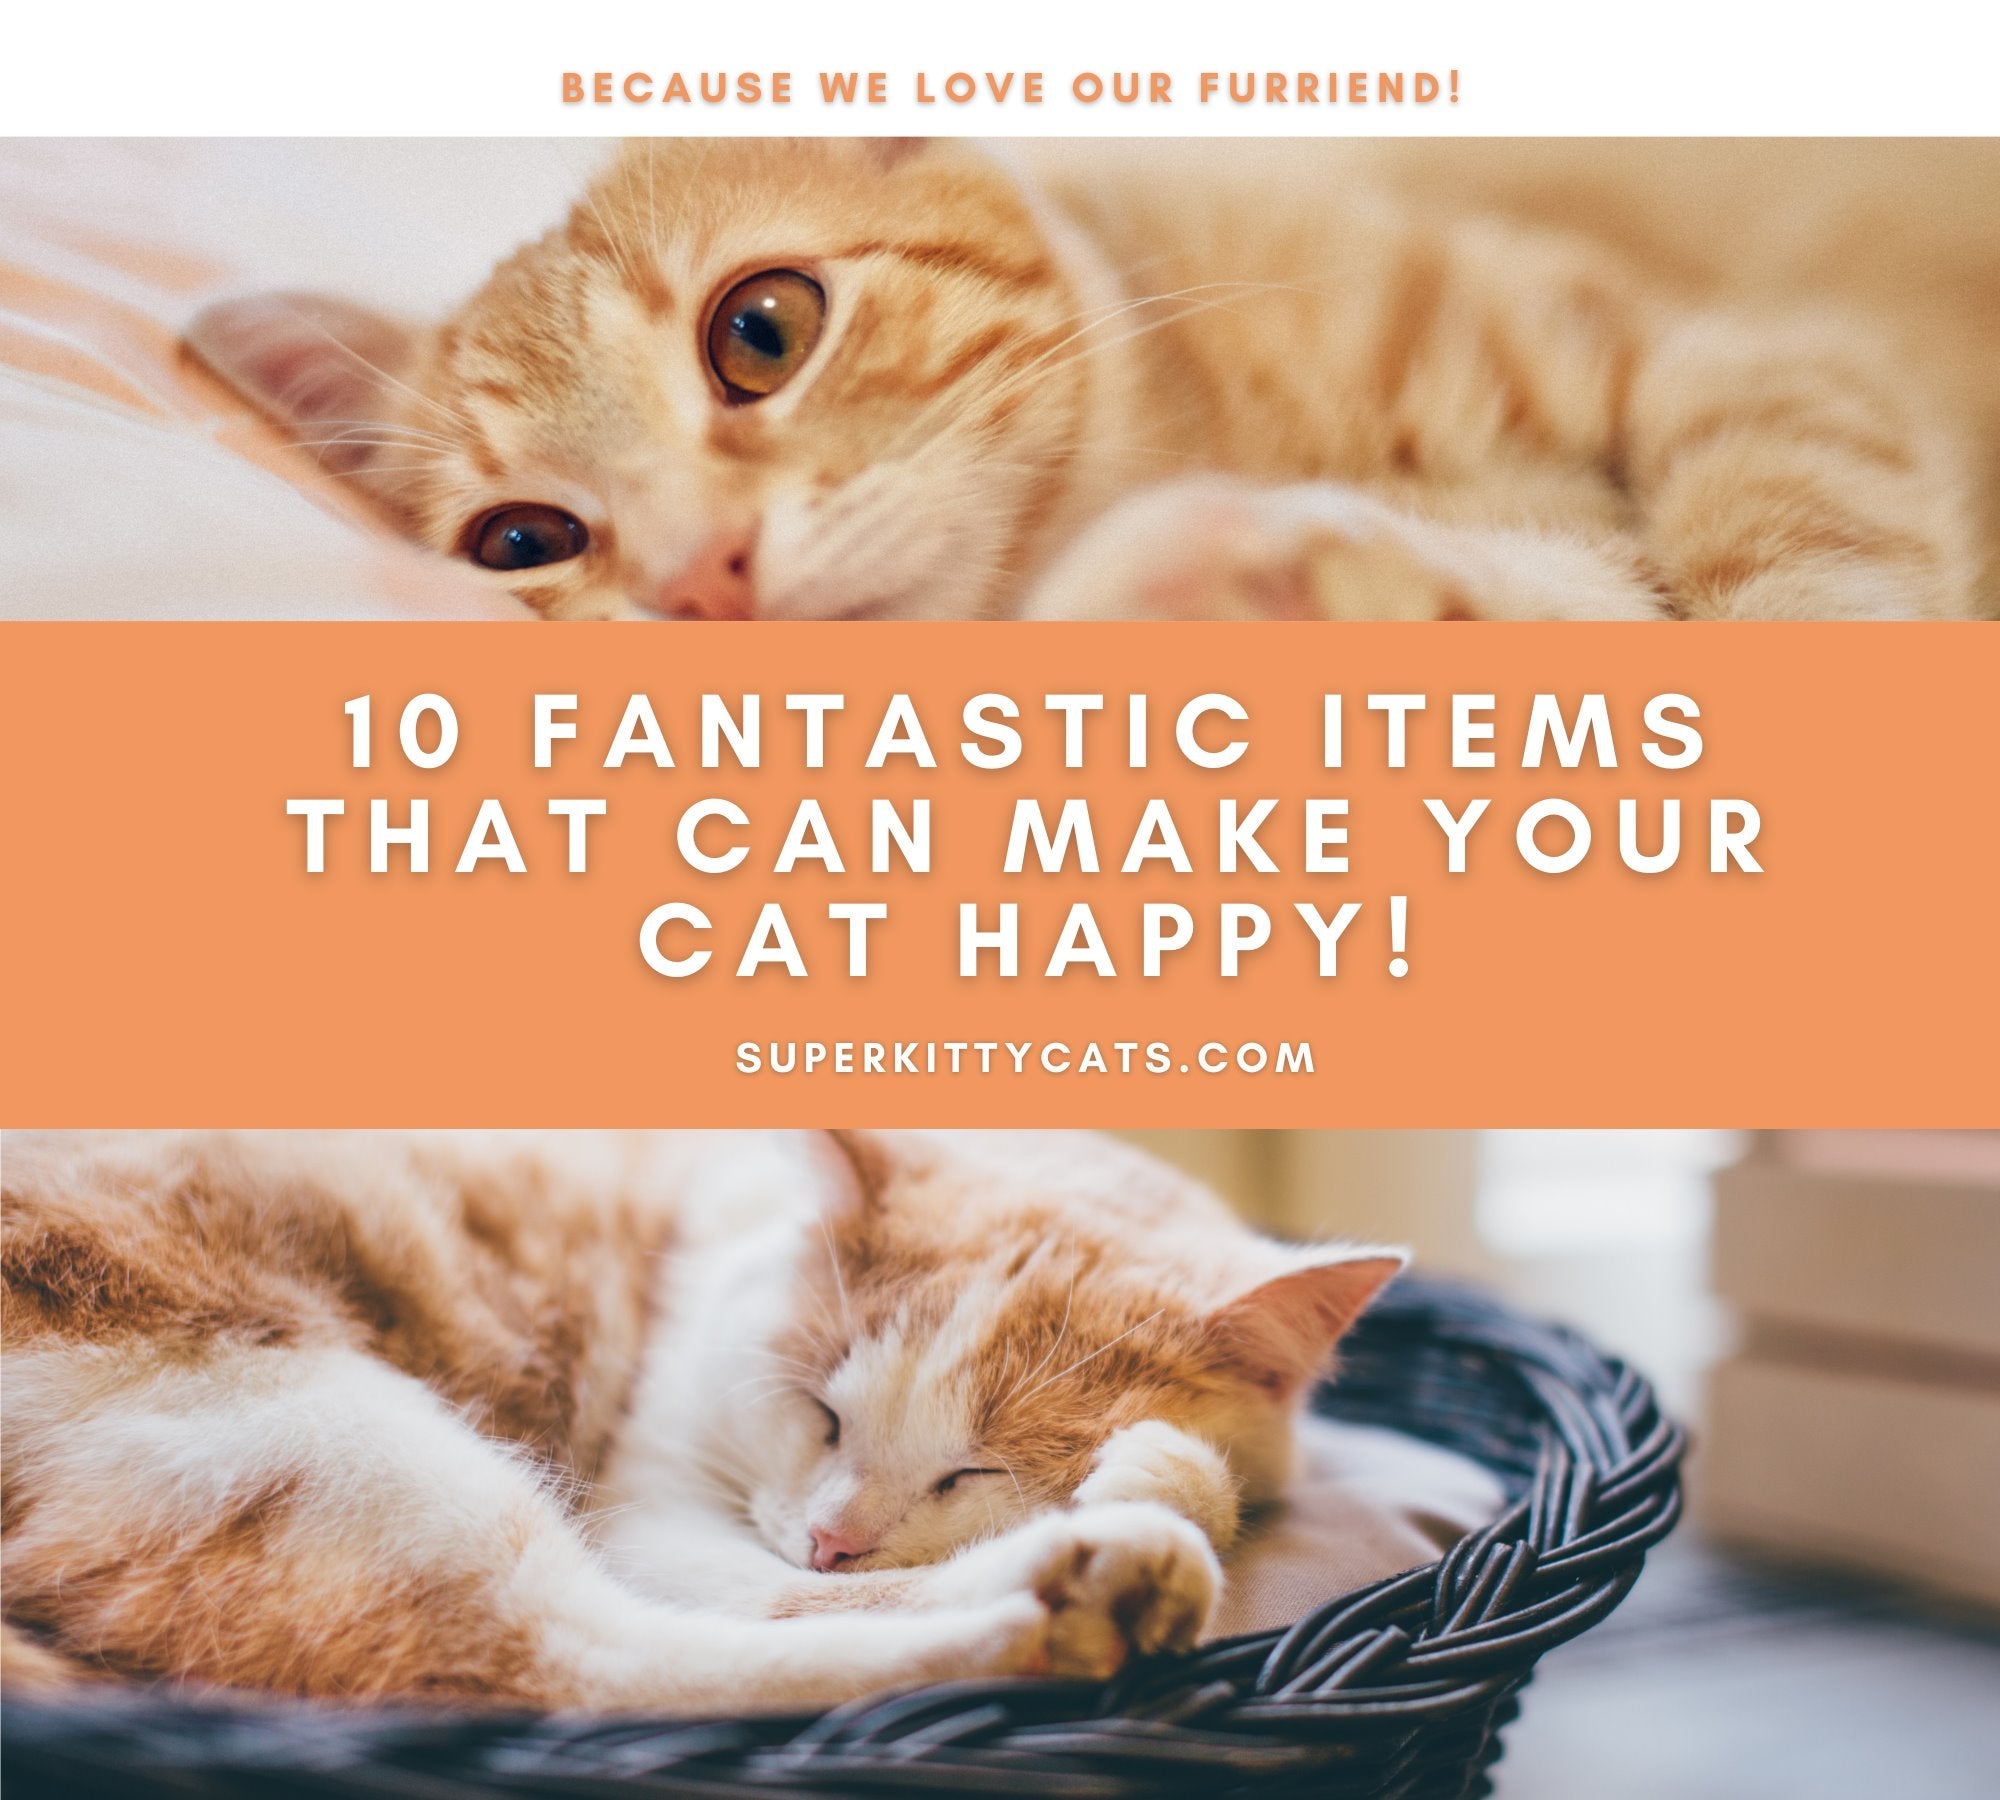 10 Fantastic Items From Super Kitty Cats That Can Make Your Cat Happy! ( Part 1 of 2) - Super Kitty Cats